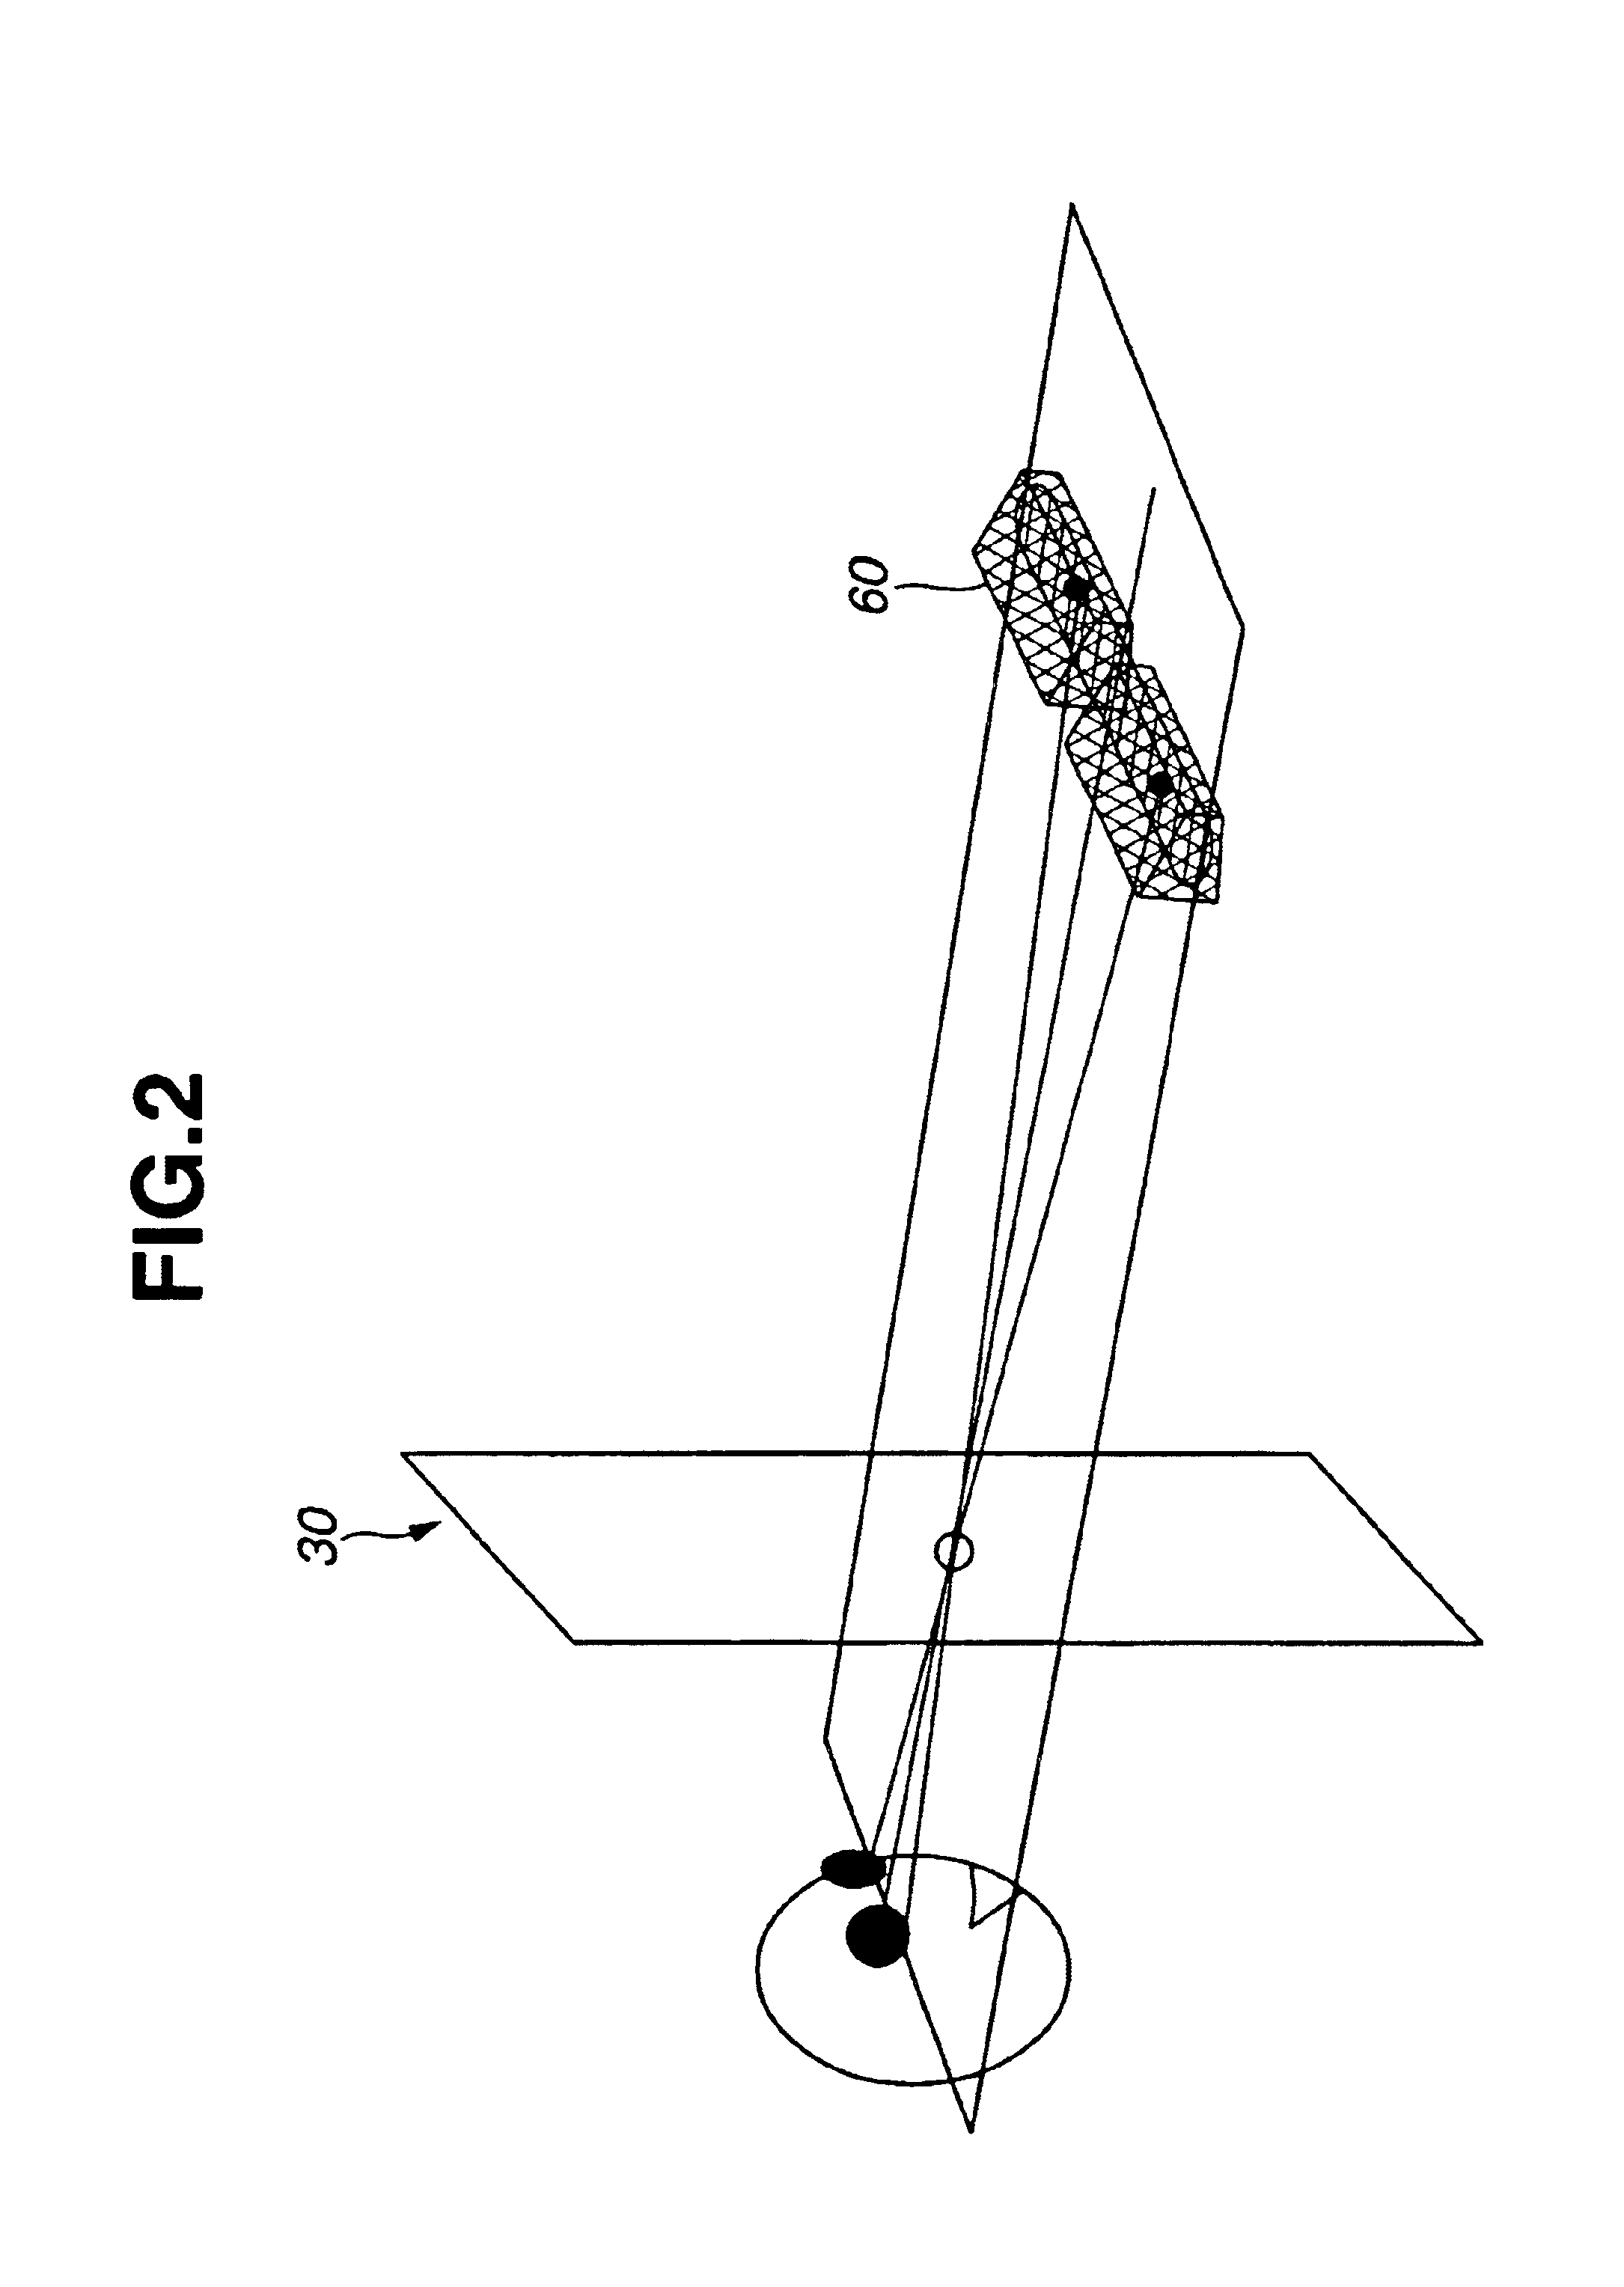 Stereoscopic display system for viewing without spectacles